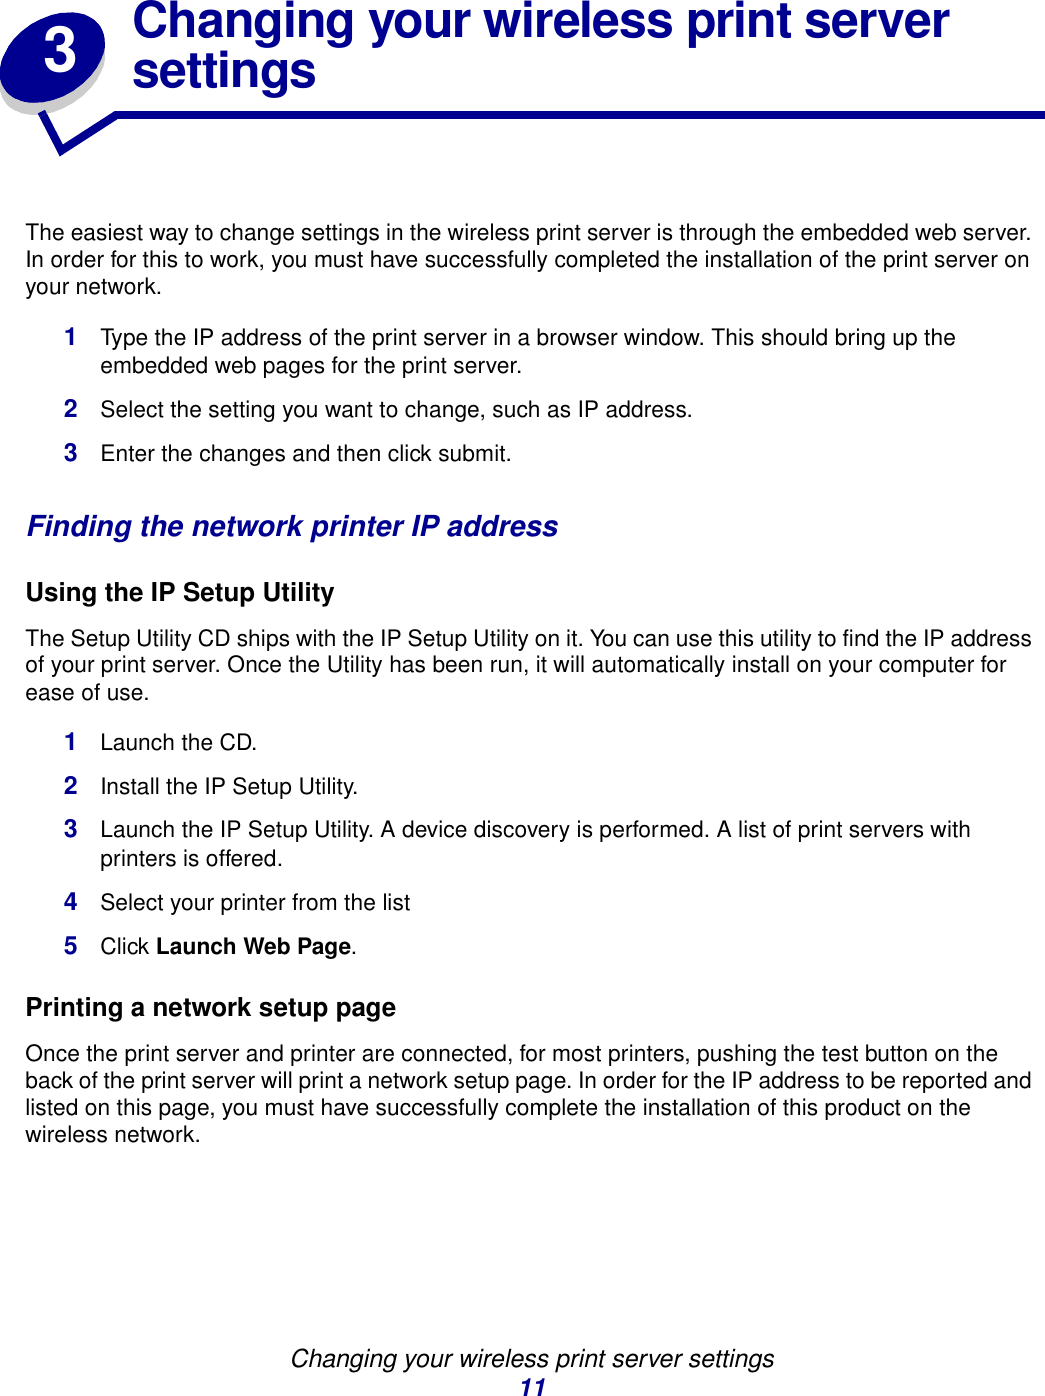 Changing your wireless print server settings113Changing your wireless print server settingsThe easiest way to change settings in the wireless print server is through the embedded web server. In order for this to work, you must have successfully completed the installation of the print server on your network. 1Type the IP address of the print server in a browser window. This should bring up the embedded web pages for the print server.2Select the setting you want to change, such as IP address.3Enter the changes and then click submit.Finding the network printer IP addressUsing the IP Setup UtilityThe Setup Utility CD ships with the IP Setup Utility on it. You can use this utility to find the IP address of your print server. Once the Utility has been run, it will automatically install on your computer for ease of use. 1Launch the CD.2Install the IP Setup Utility.3Launch the IP Setup Utility. A device discovery is performed. A list of print servers with printers is offered.4Select your printer from the list5Click Launch Web Page.Printing a network setup page Once the print server and printer are connected, for most printers, pushing the test button on the back of the print server will print a network setup page. In order for the IP address to be reported and listed on this page, you must have successfully complete the installation of this product on the wireless network.